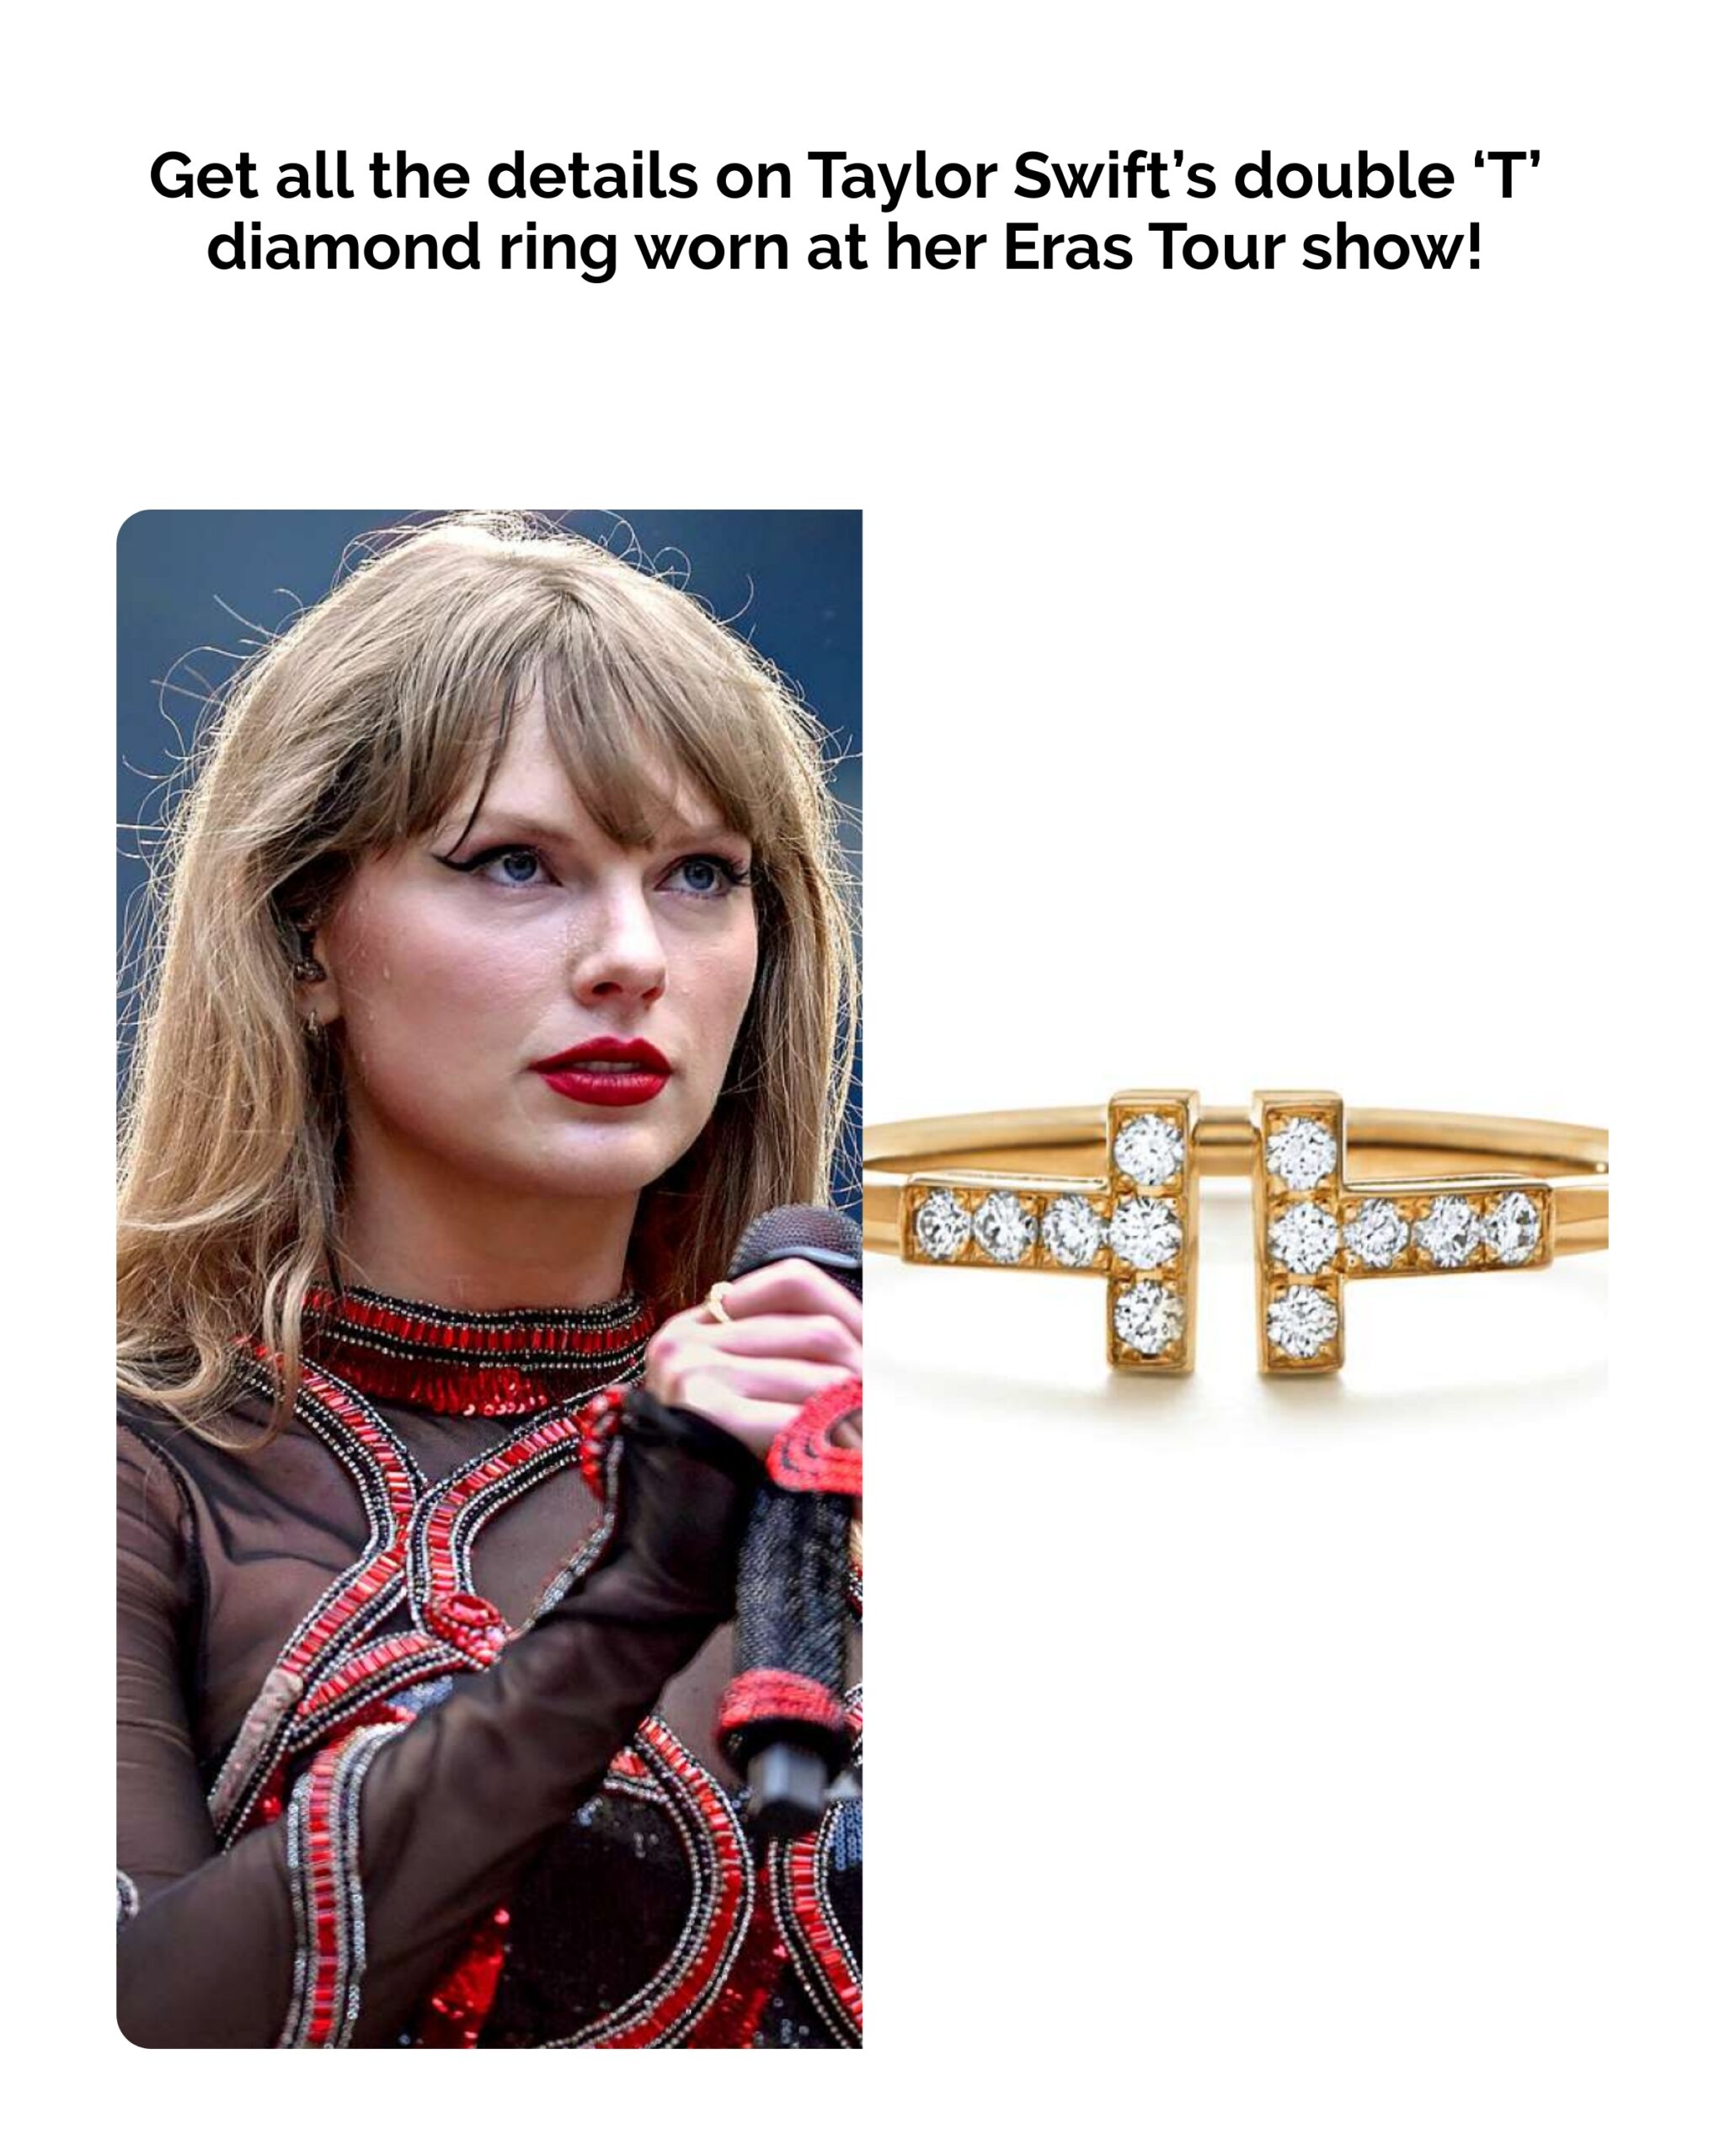 Taylor Swift Accessorized Her Eras Tour Looks with a $2,675 Double ‘T’ Diamond Ring: See Her New Bling